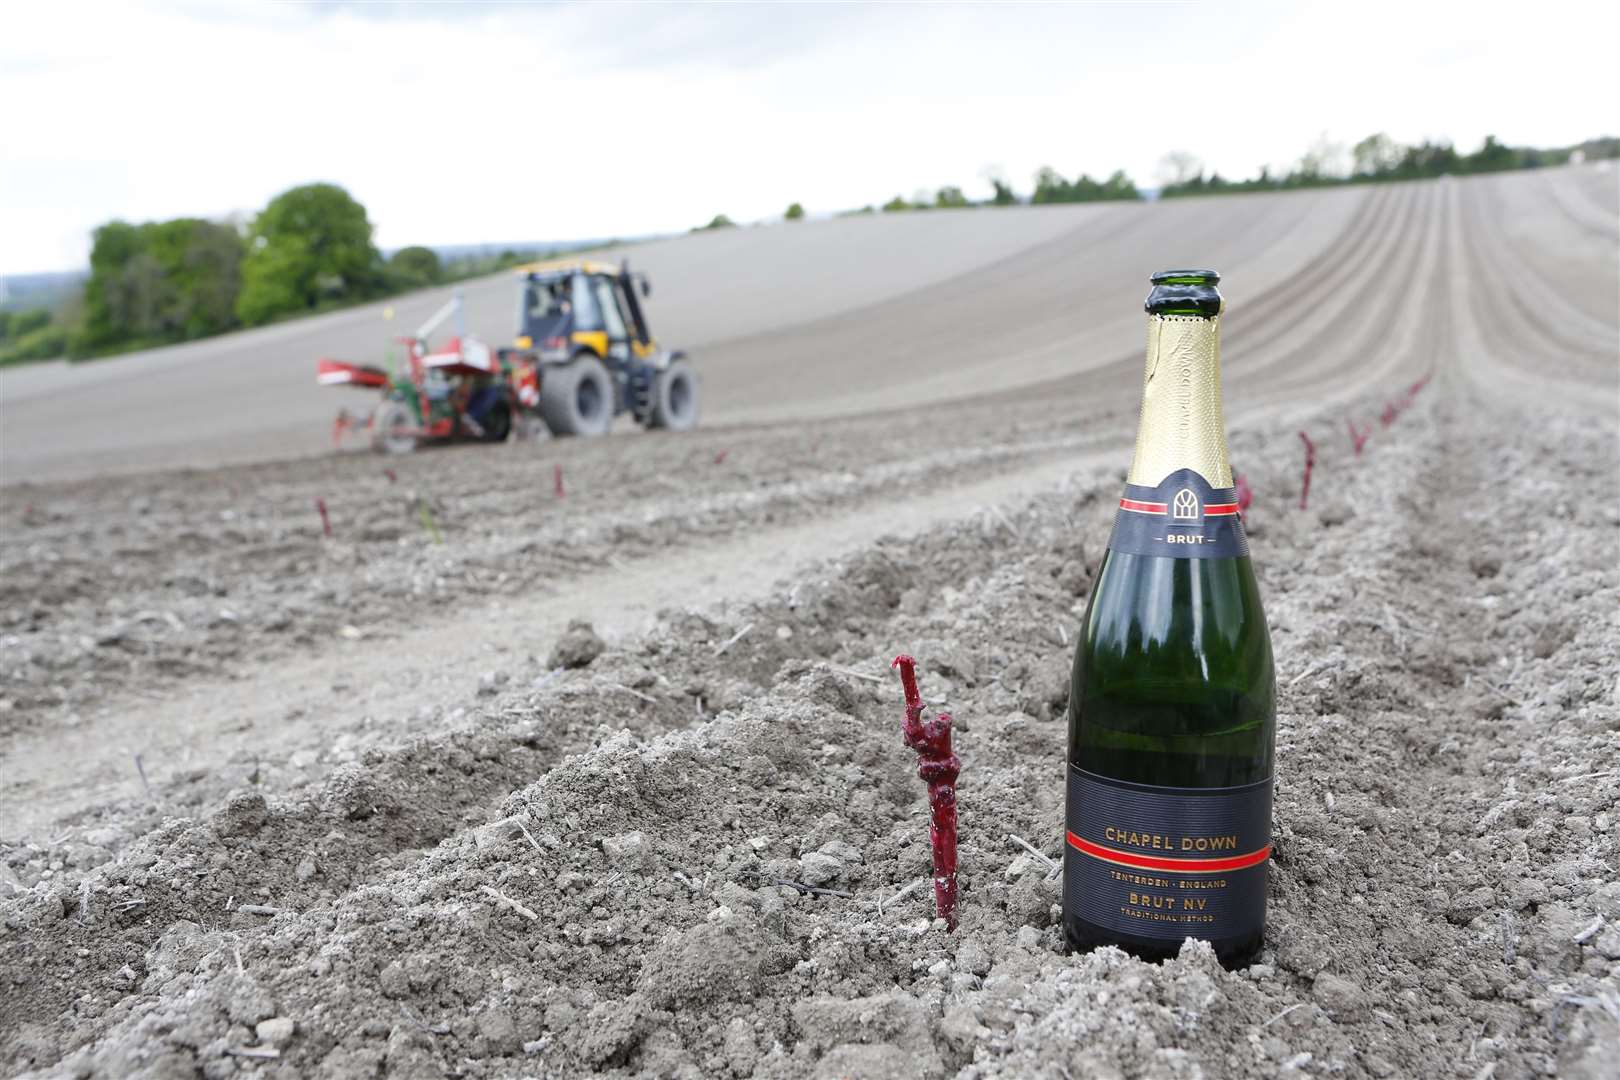 Chapel Down opens a new vineyards at Boarley Farm in Sandling, Maidstone. Picture: Andy Jones